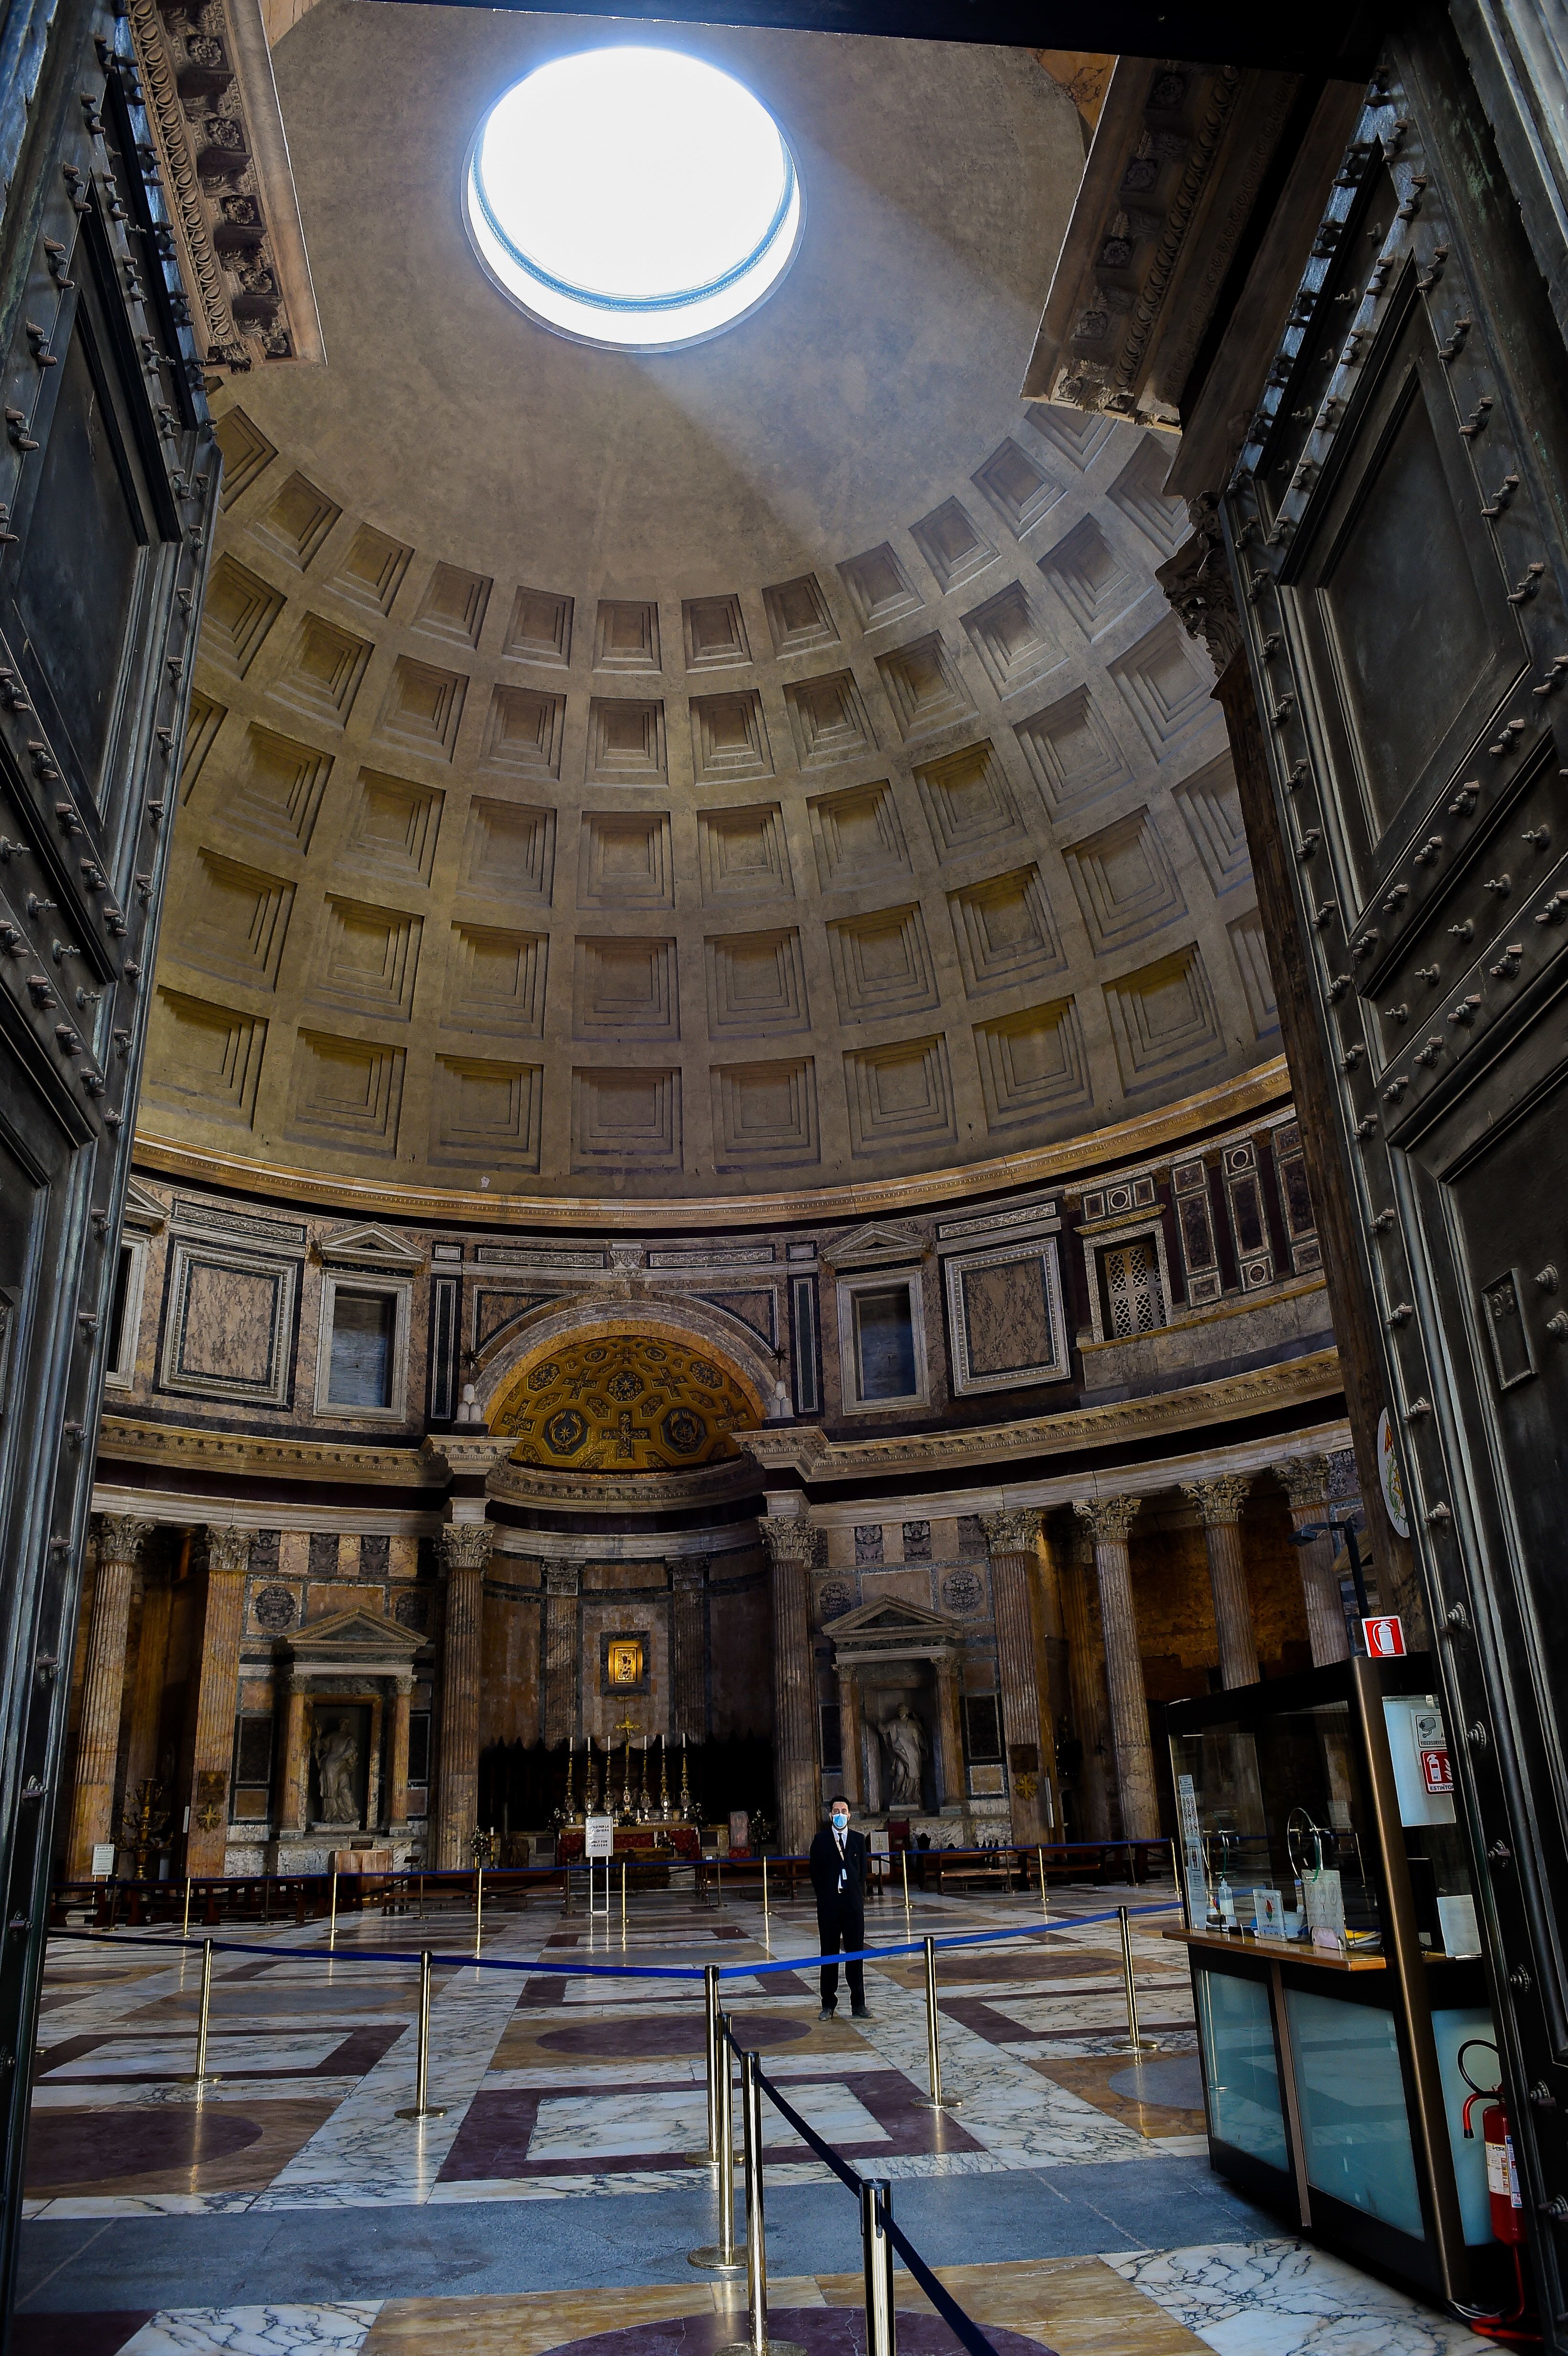 front side and top view of roman pantheon